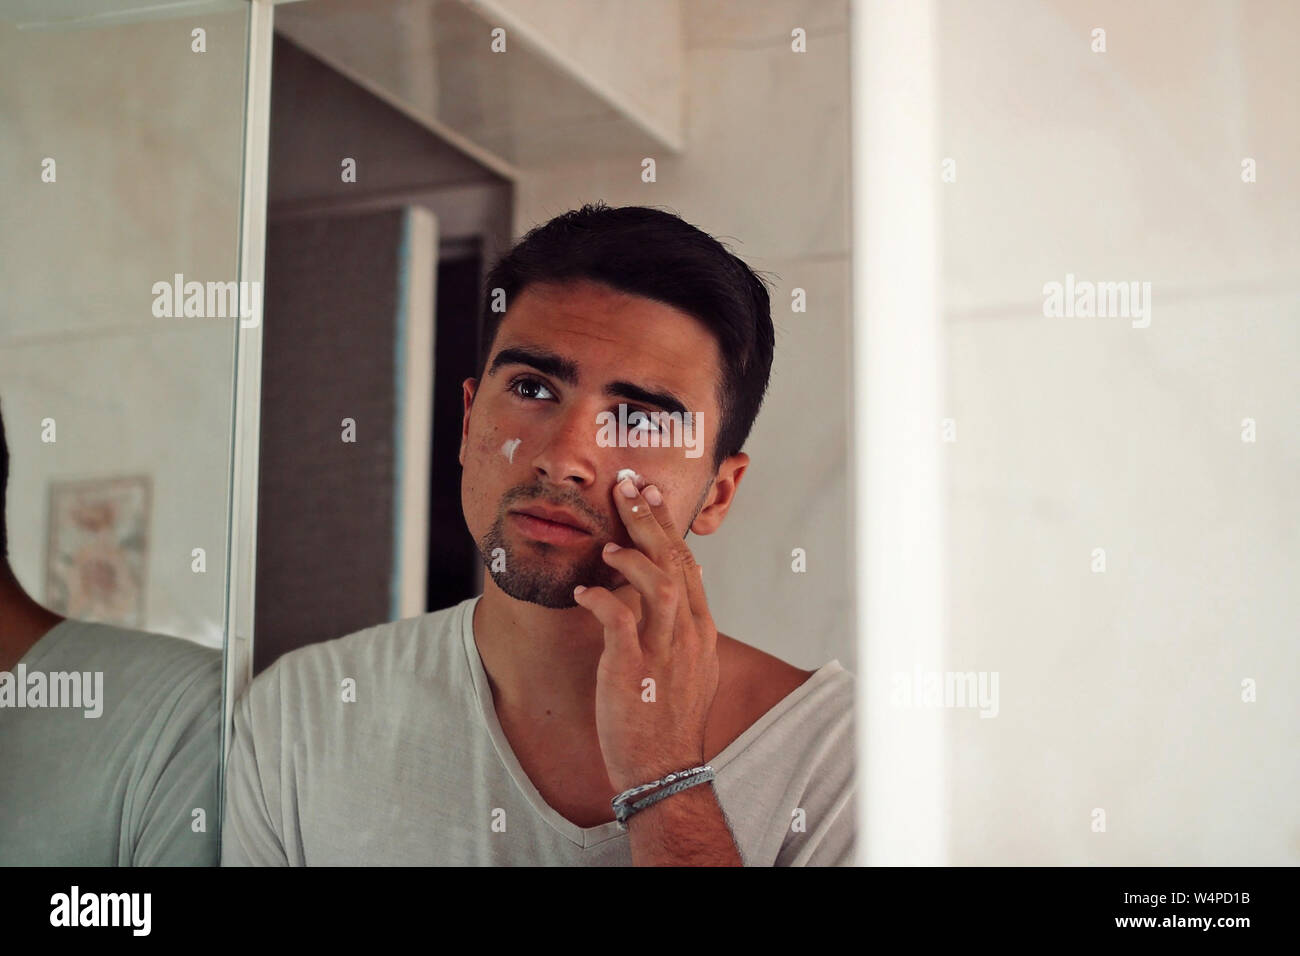 Man dressed in white putting cream on his face. Stock Photo